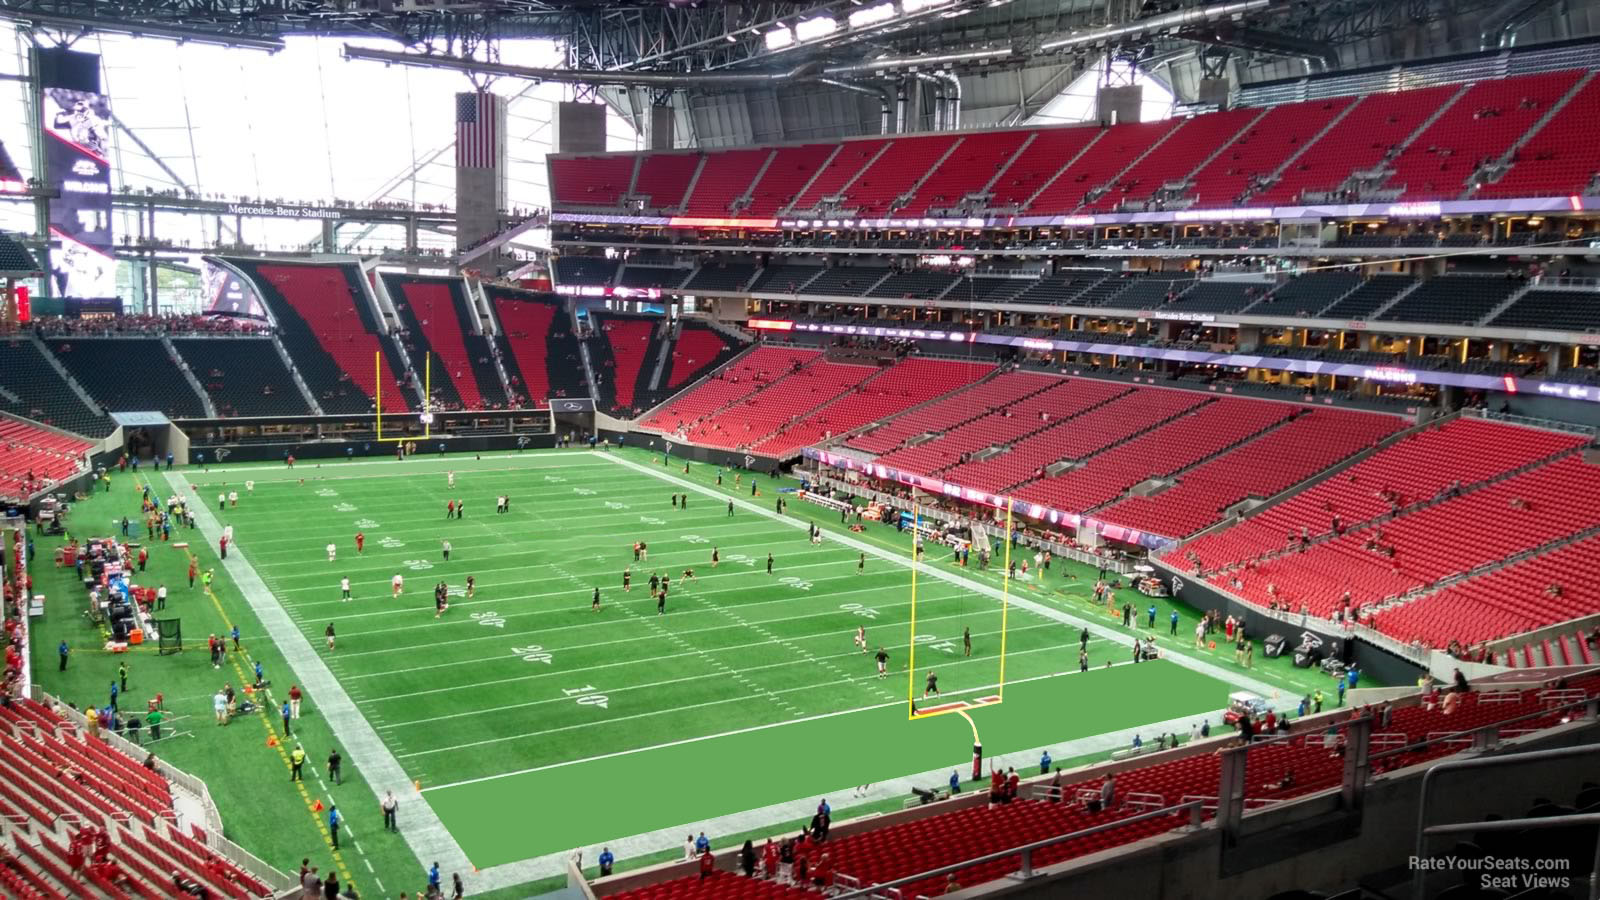 section 227, row 6 seat view  for football - mercedes-benz stadium